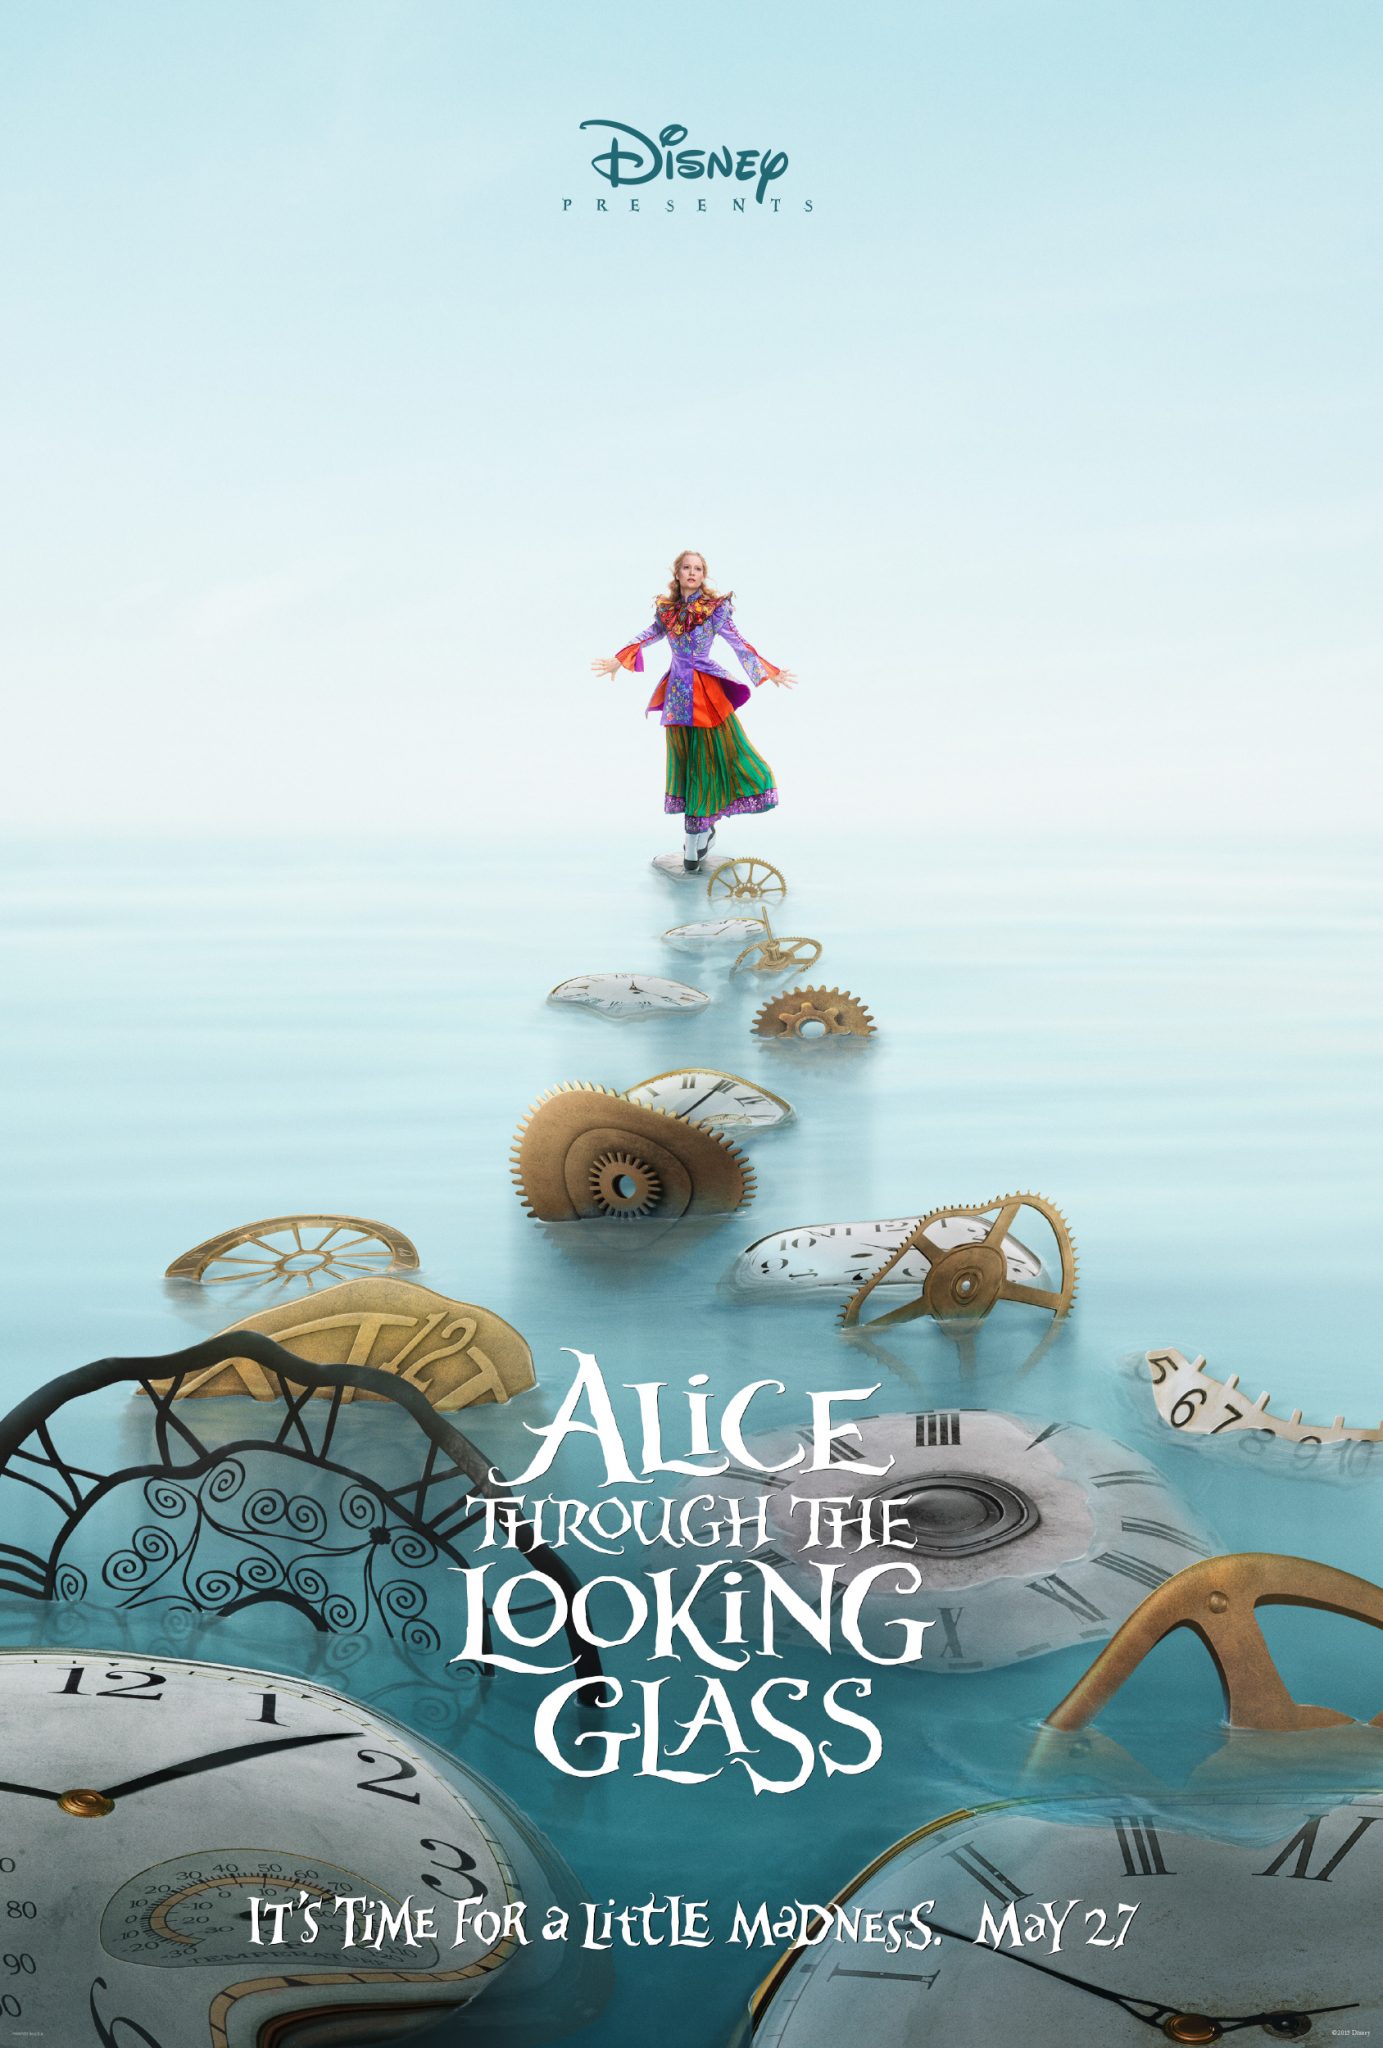 First Look! Disney’s ‘Alice Through The Looking Glass’ Starring Johnny Depp